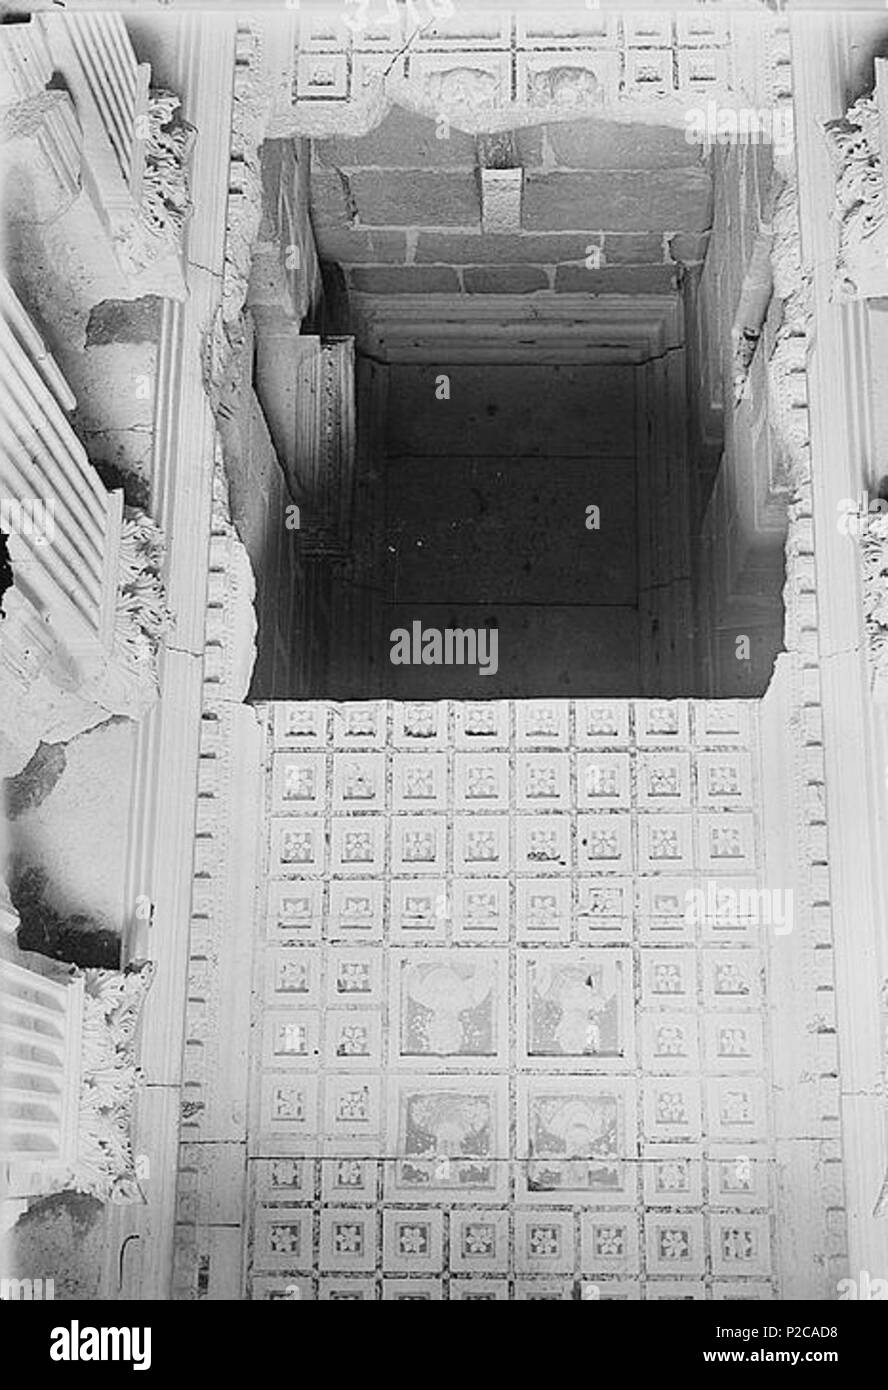 . ?????: ???? ?????? ?? ???? ????? ,?????, ?????. ???? ?????? English: Palmyra. Tower tomb of Elahbel. Interior showing painted ceiling . 1920. American Colony (Jerusalem). Photo 63 Tower of Elahbel - 02874v Stock Photo